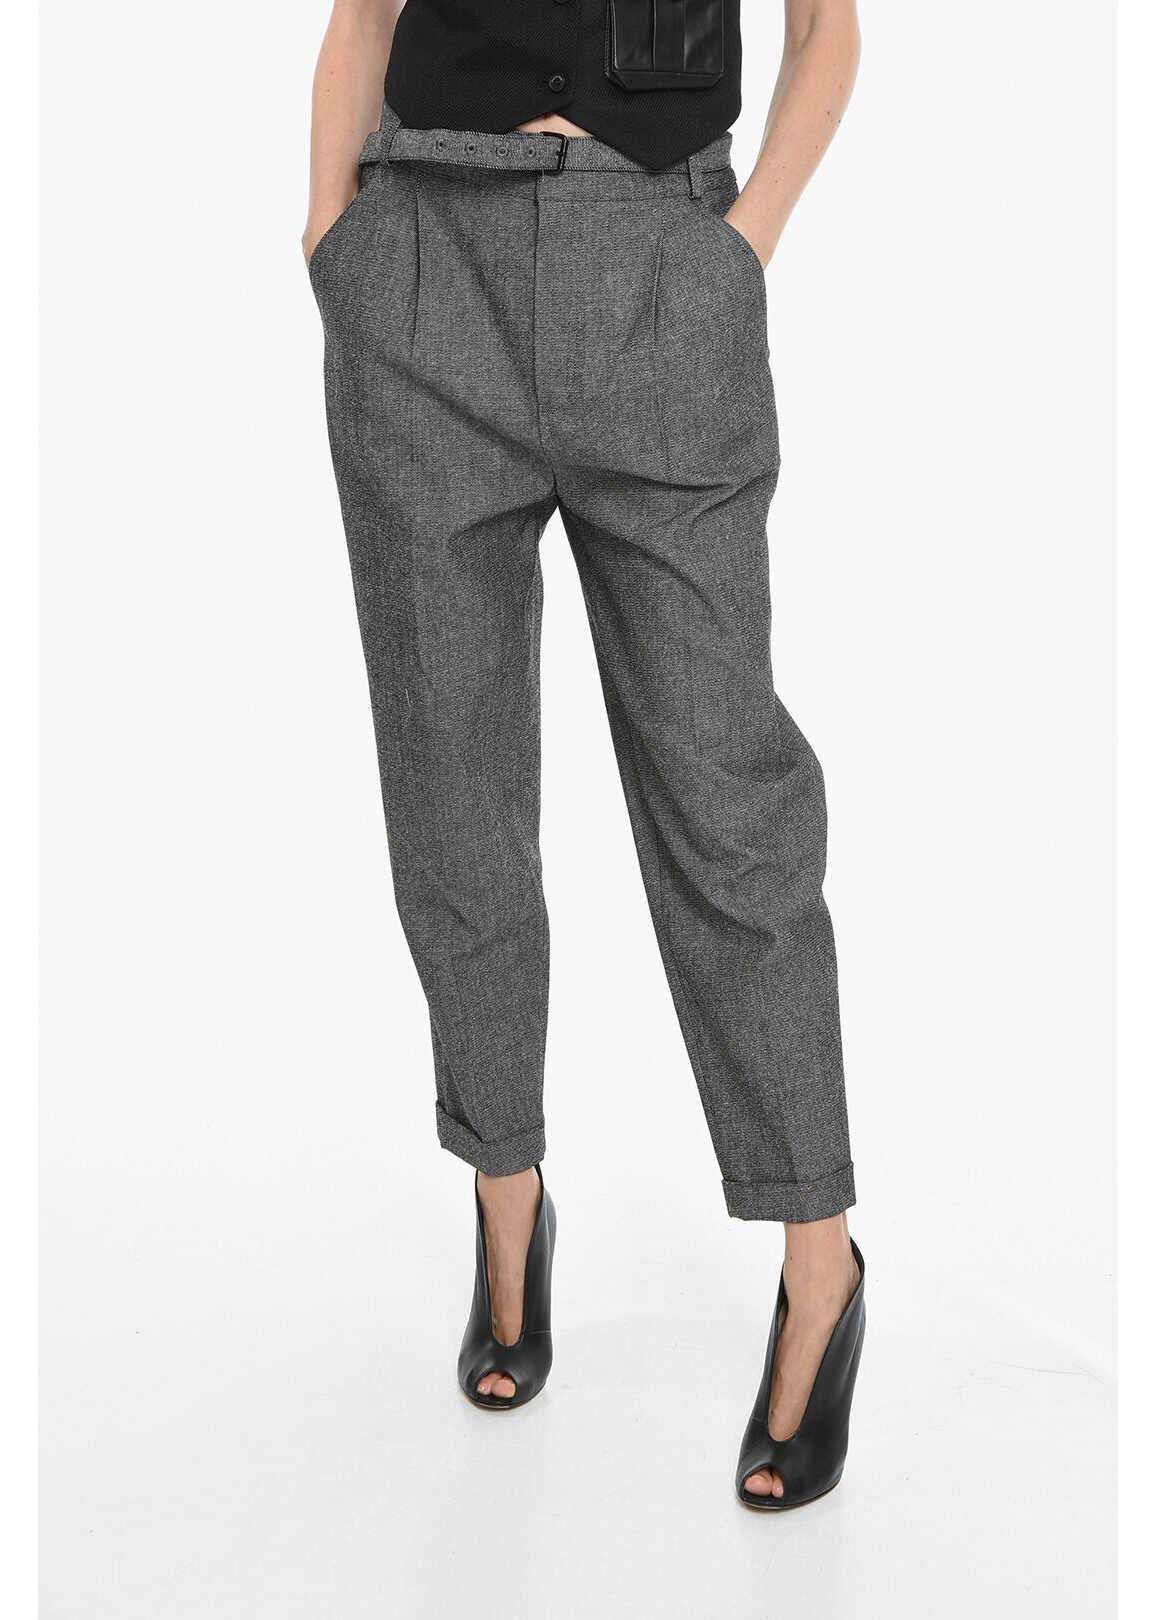 Dior Cotton Blend Single-Pleated Pants With Belt Gray